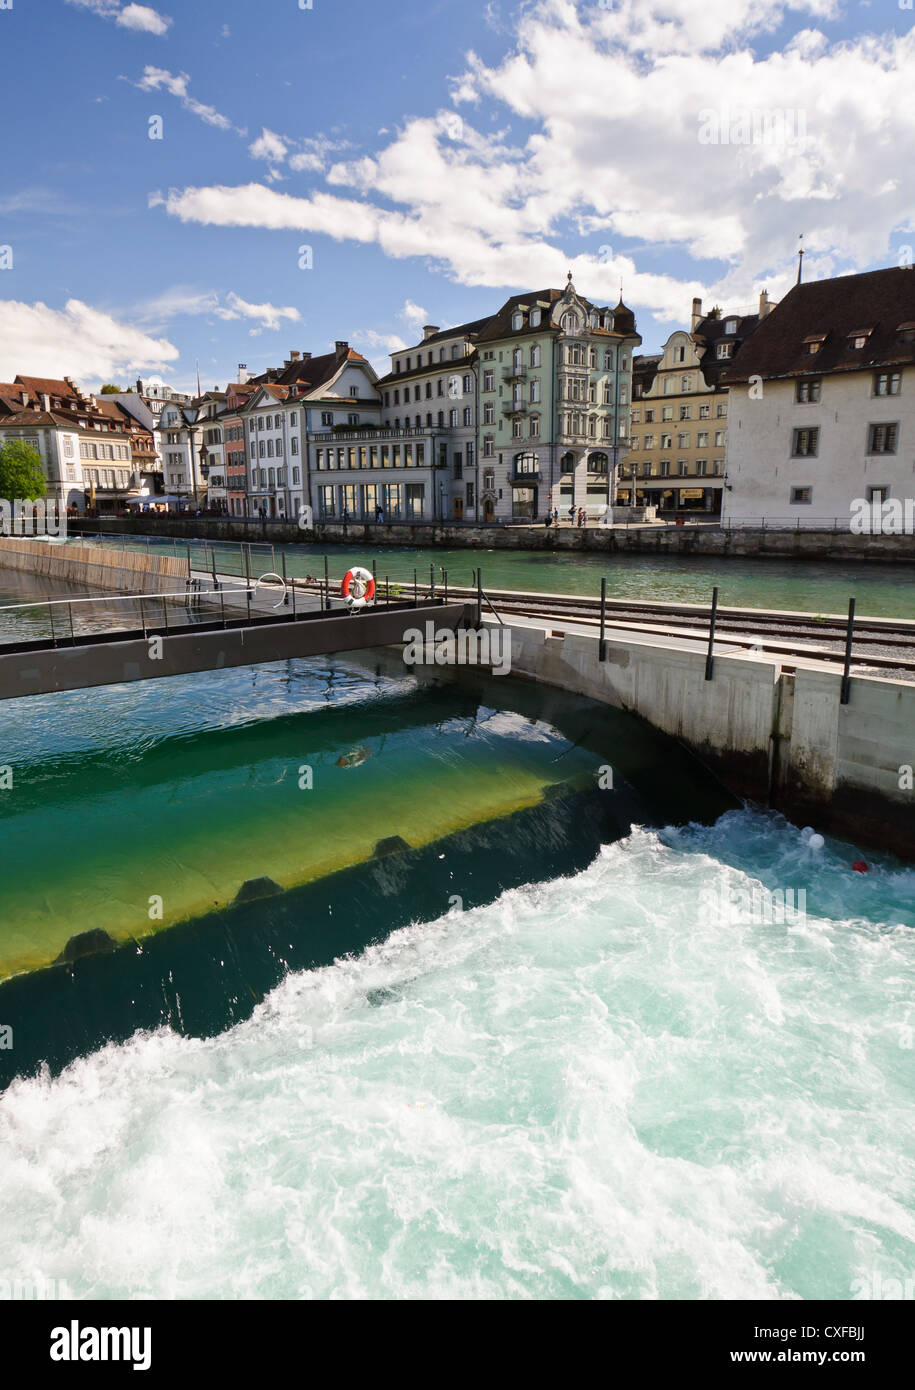 Waterfall in Lucerne river, Switzerland. Stock Photo